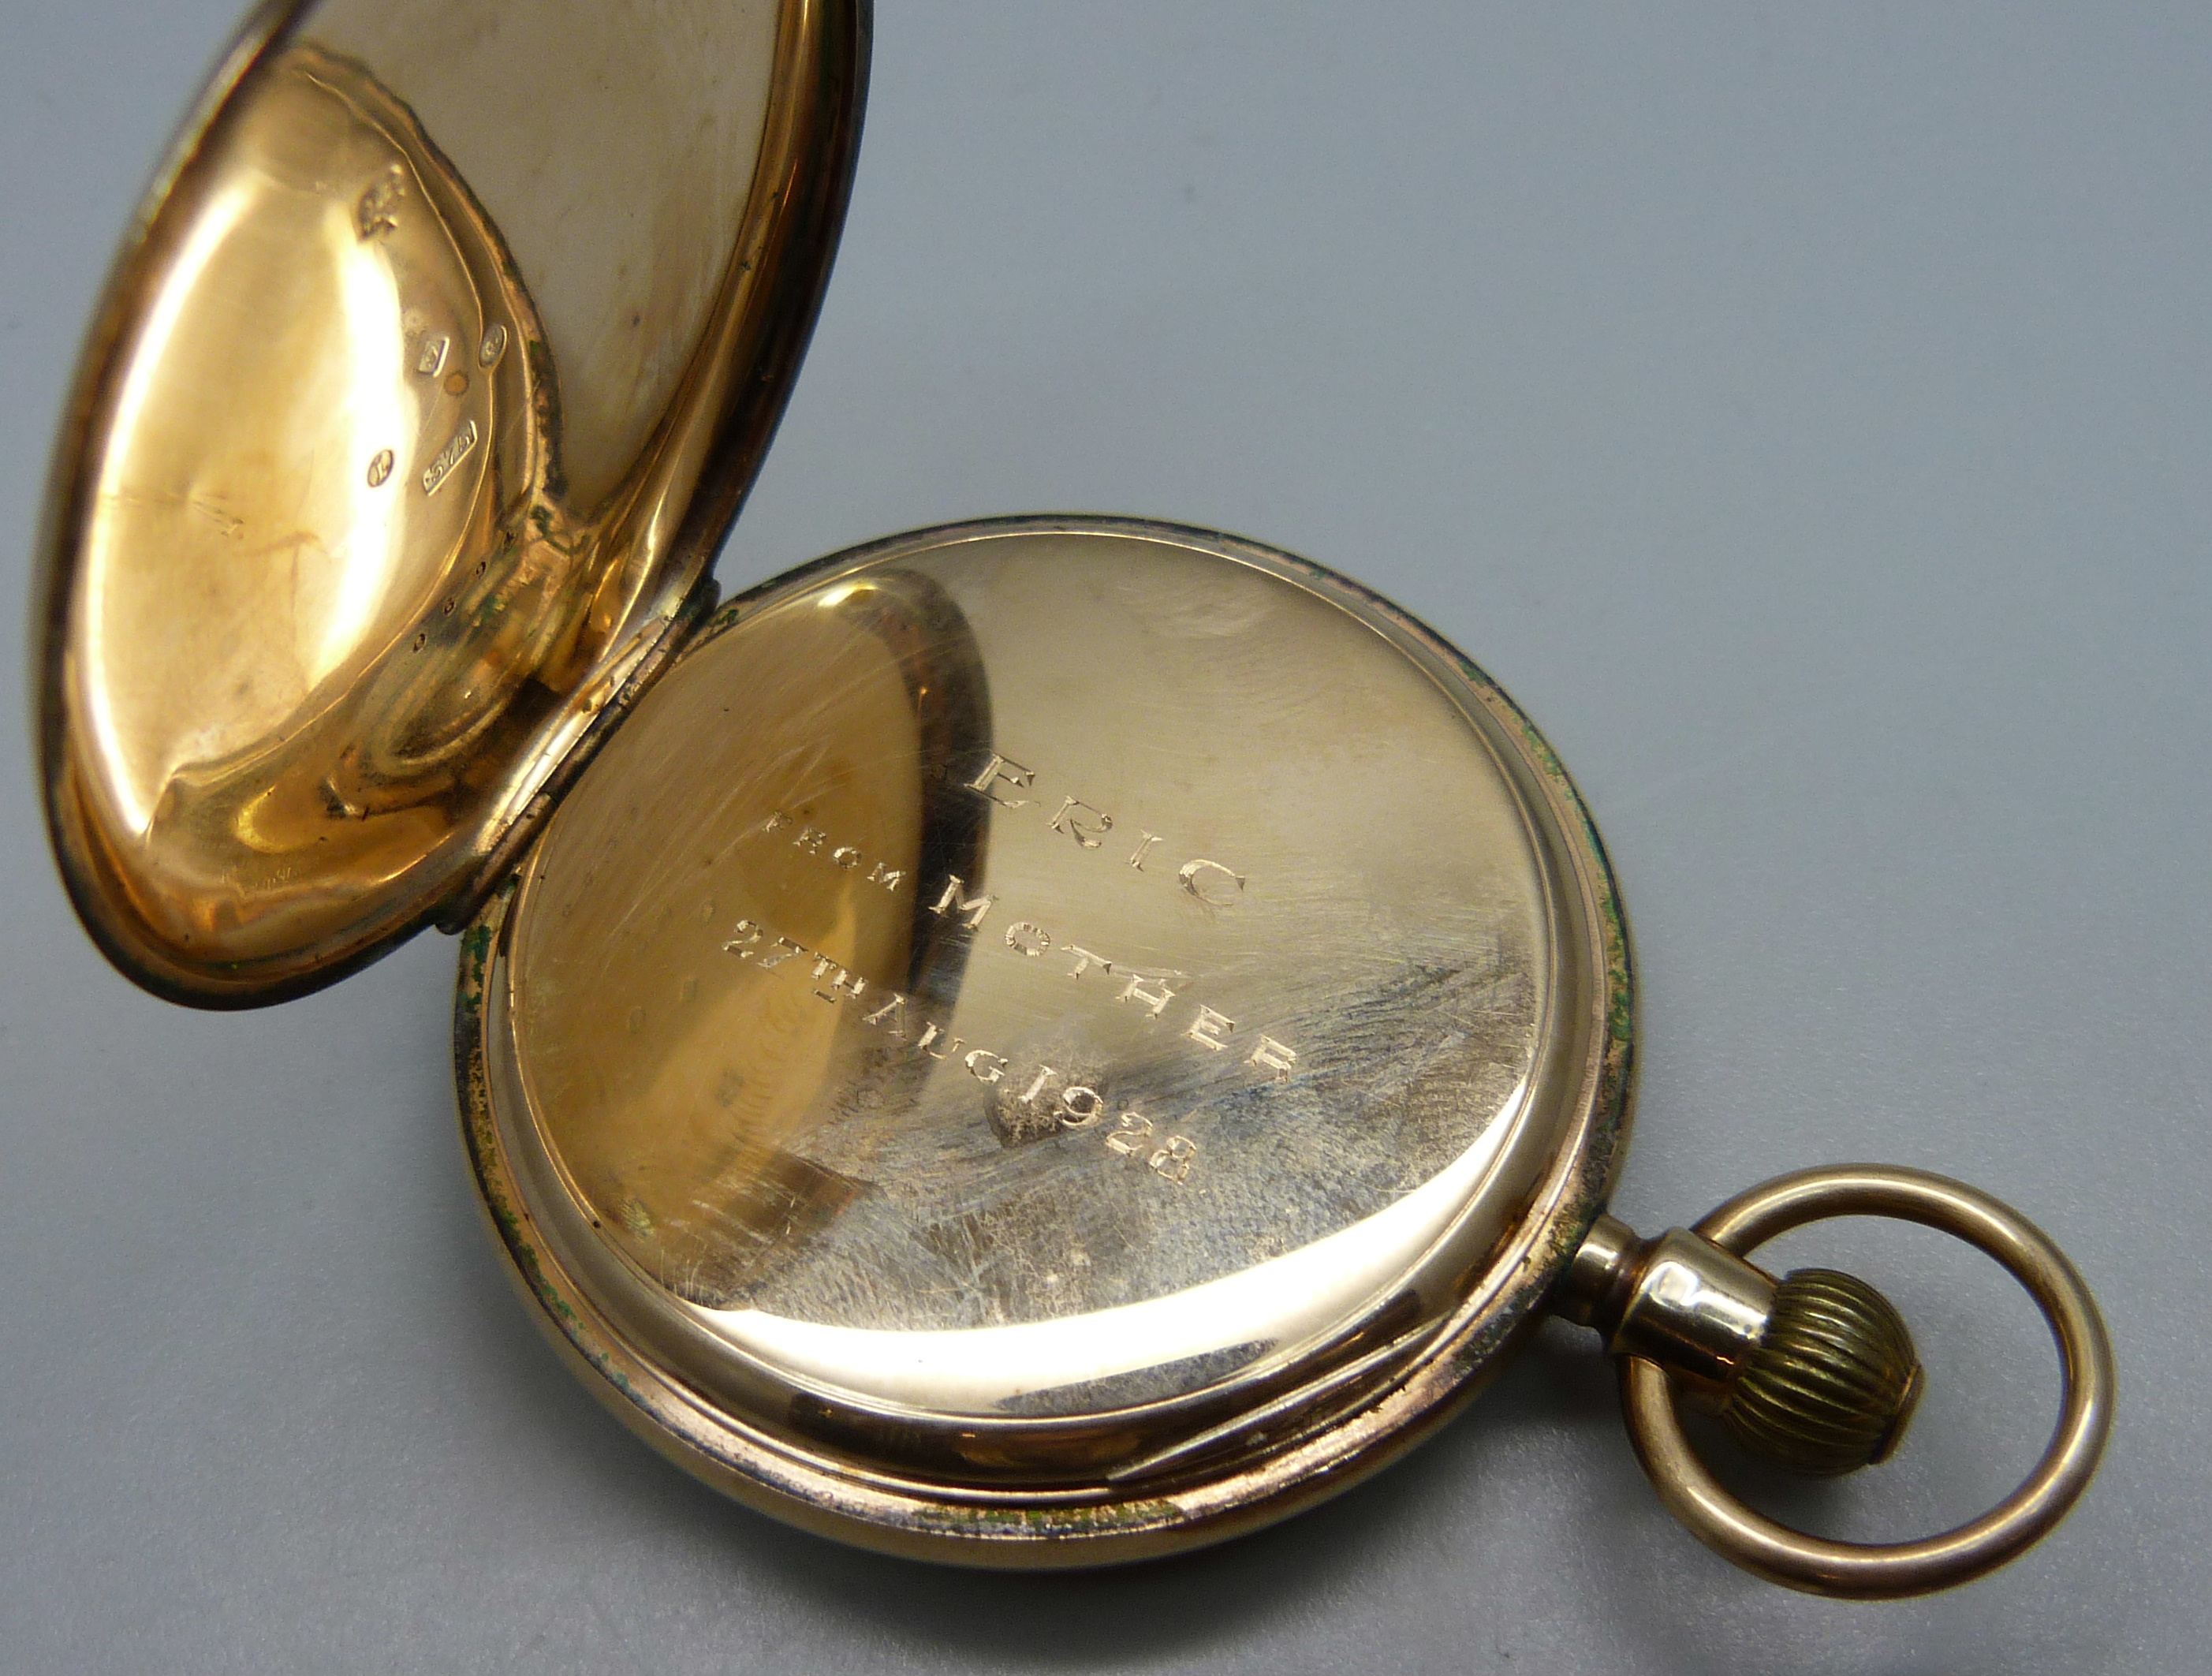 A 9ct gold full-hunter pocket watch, inner case 9ct gold, bears inscription dated 1928 and monogram, - Image 5 of 8